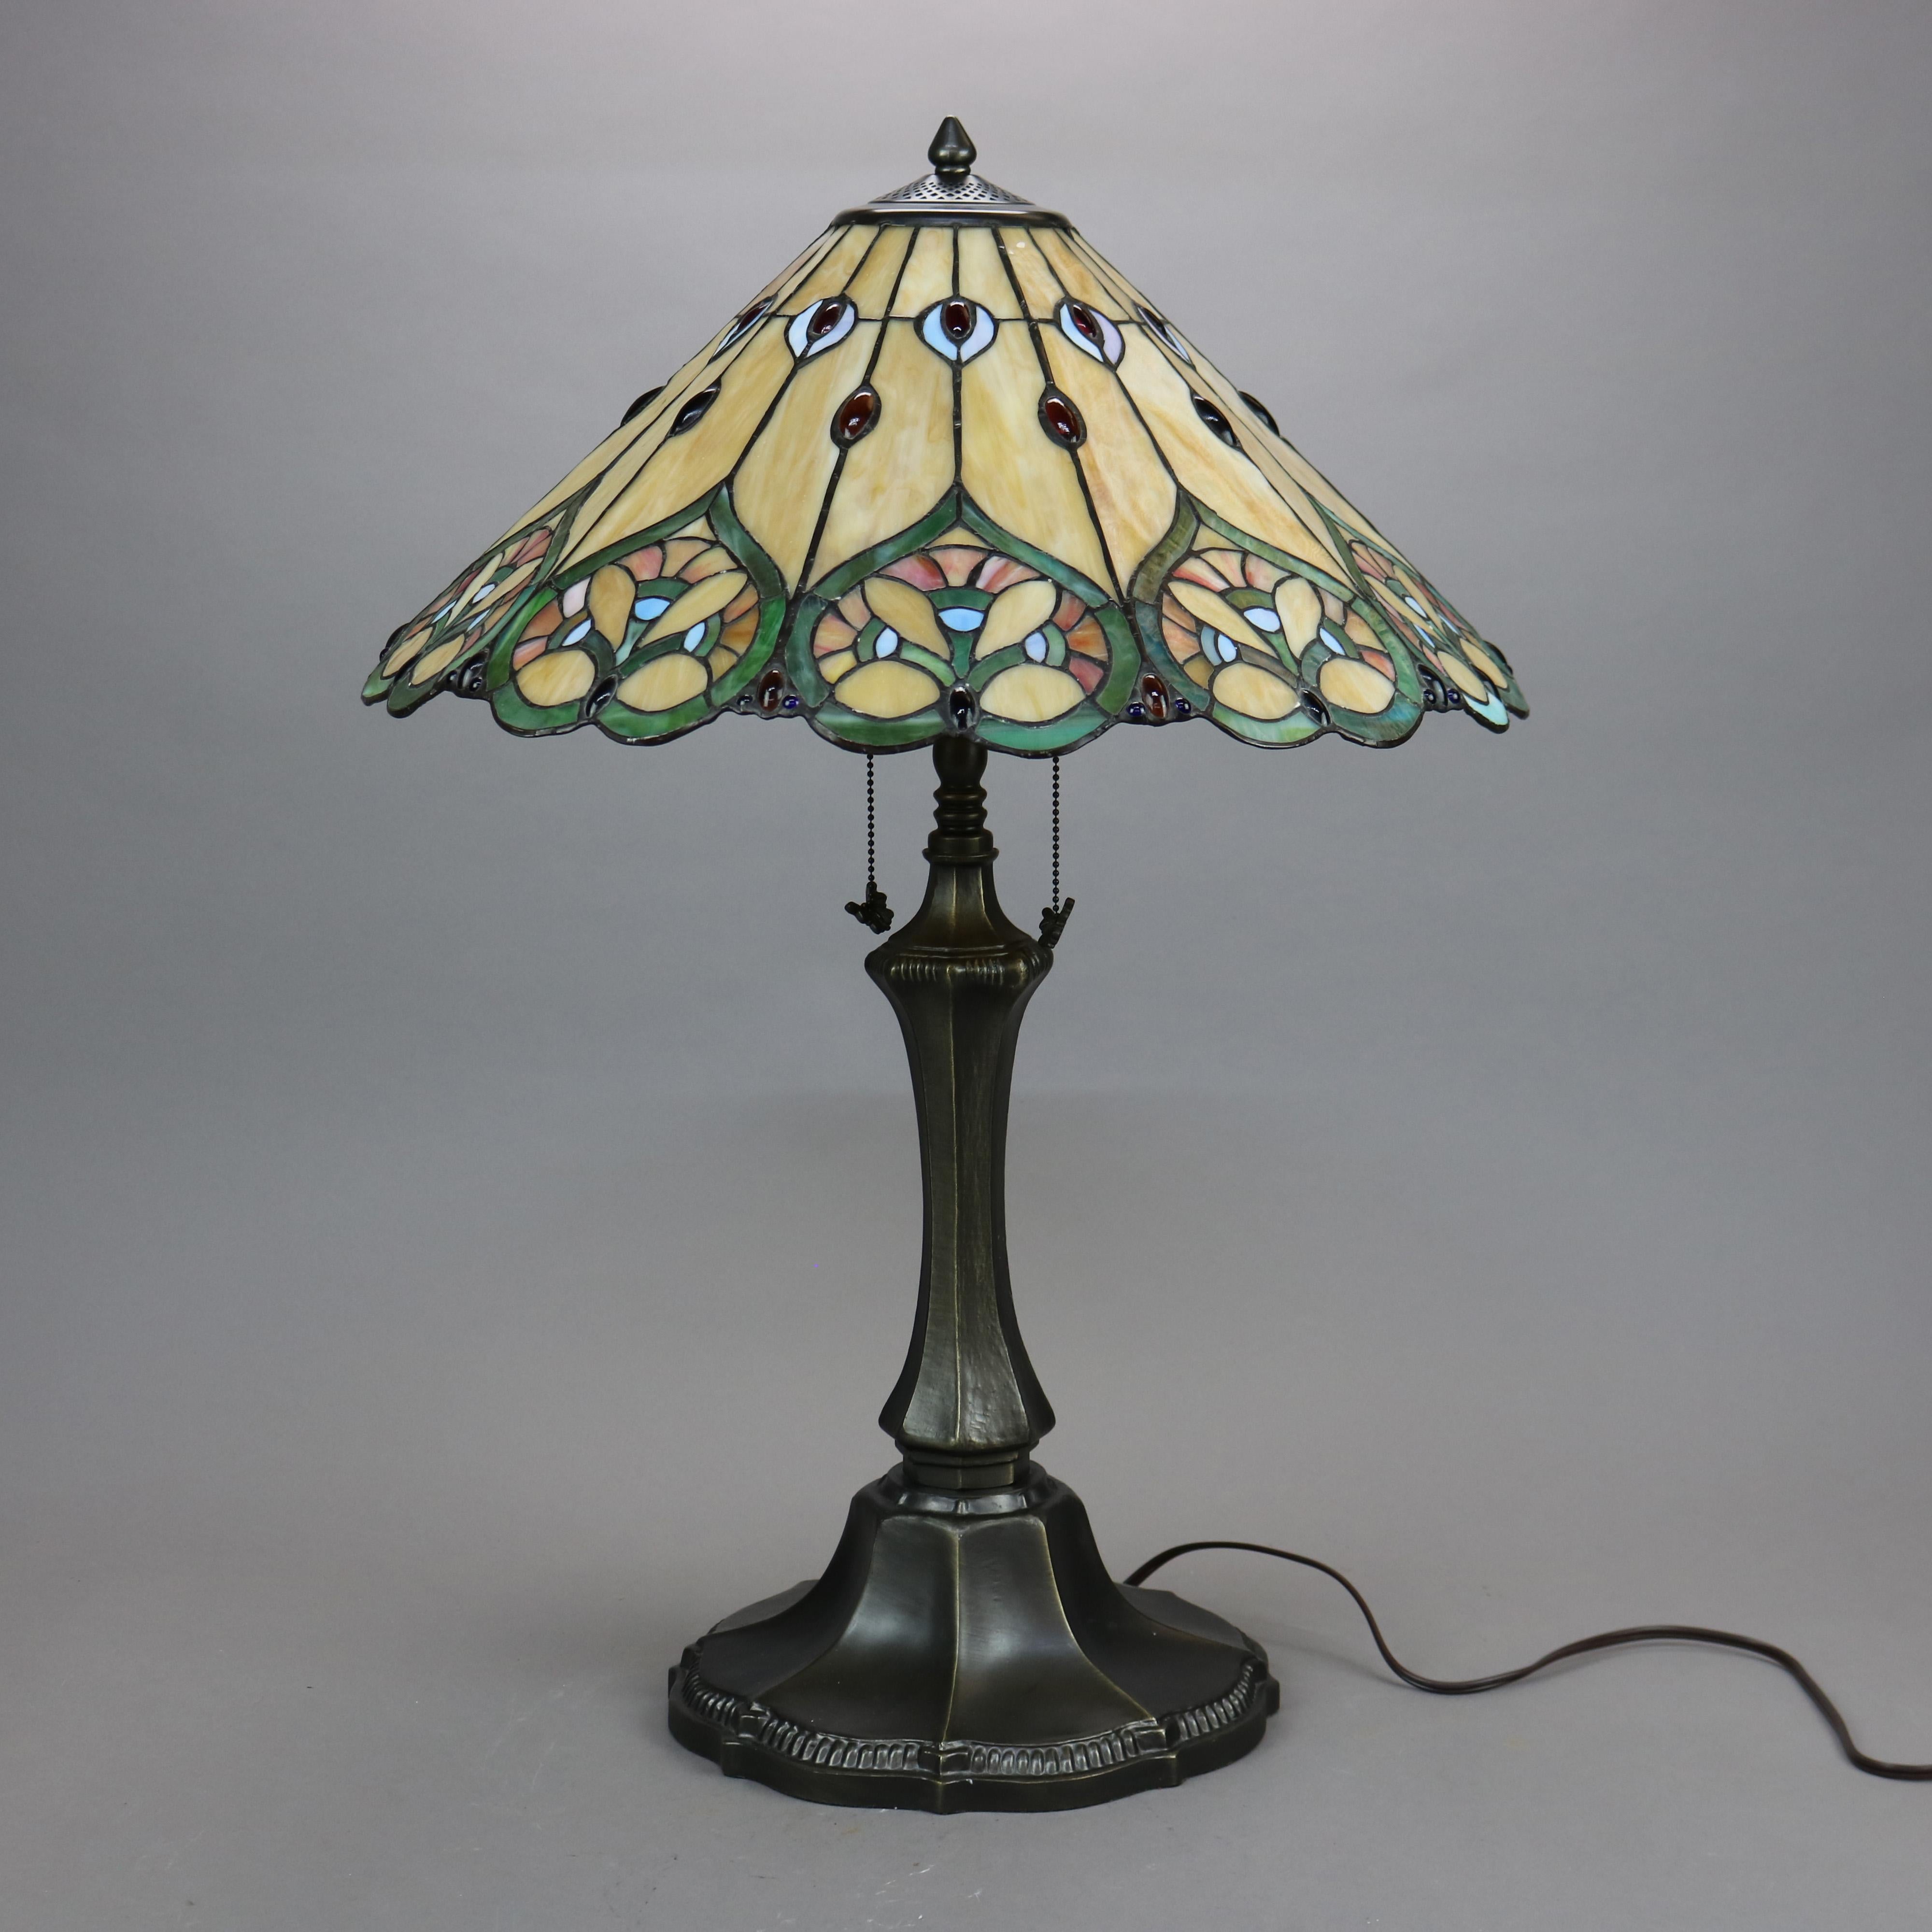 Bronzed Arts & Crafts Tiffany Style Leaded Stained Glass Table Lamp, 20th C